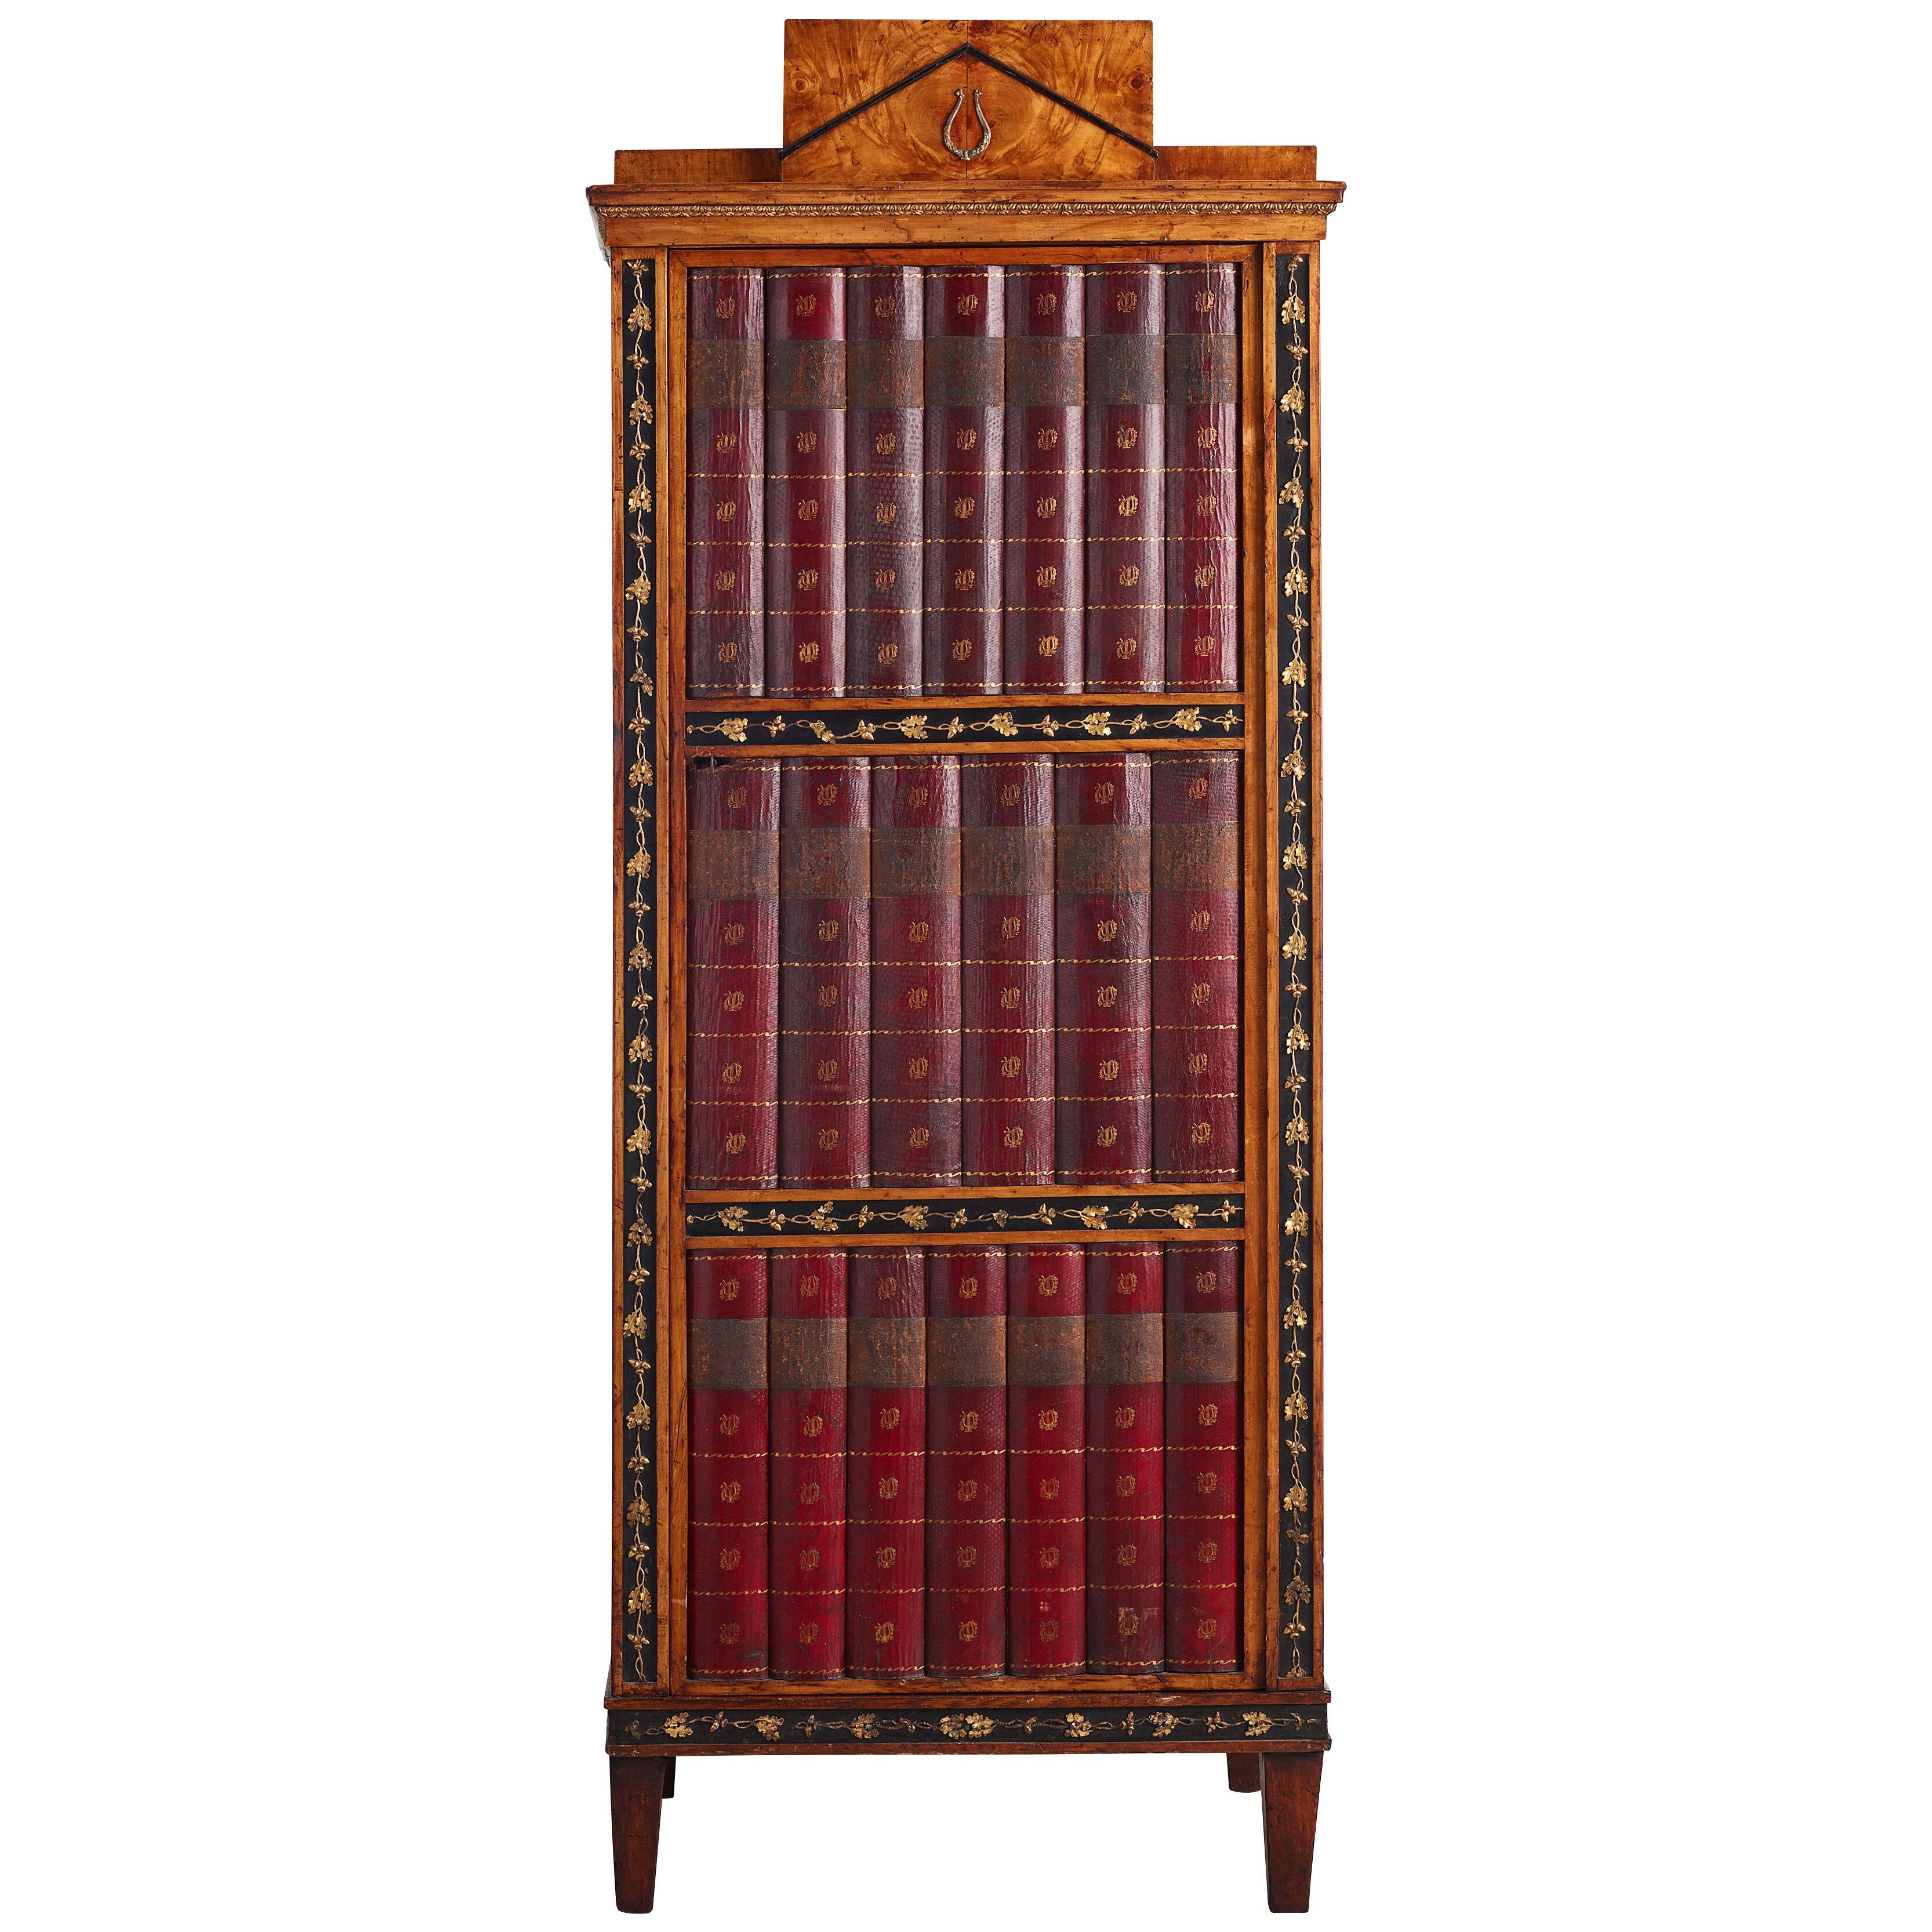 Unusual Neoclassical Cabinet with Faux-book spine Decorated Door